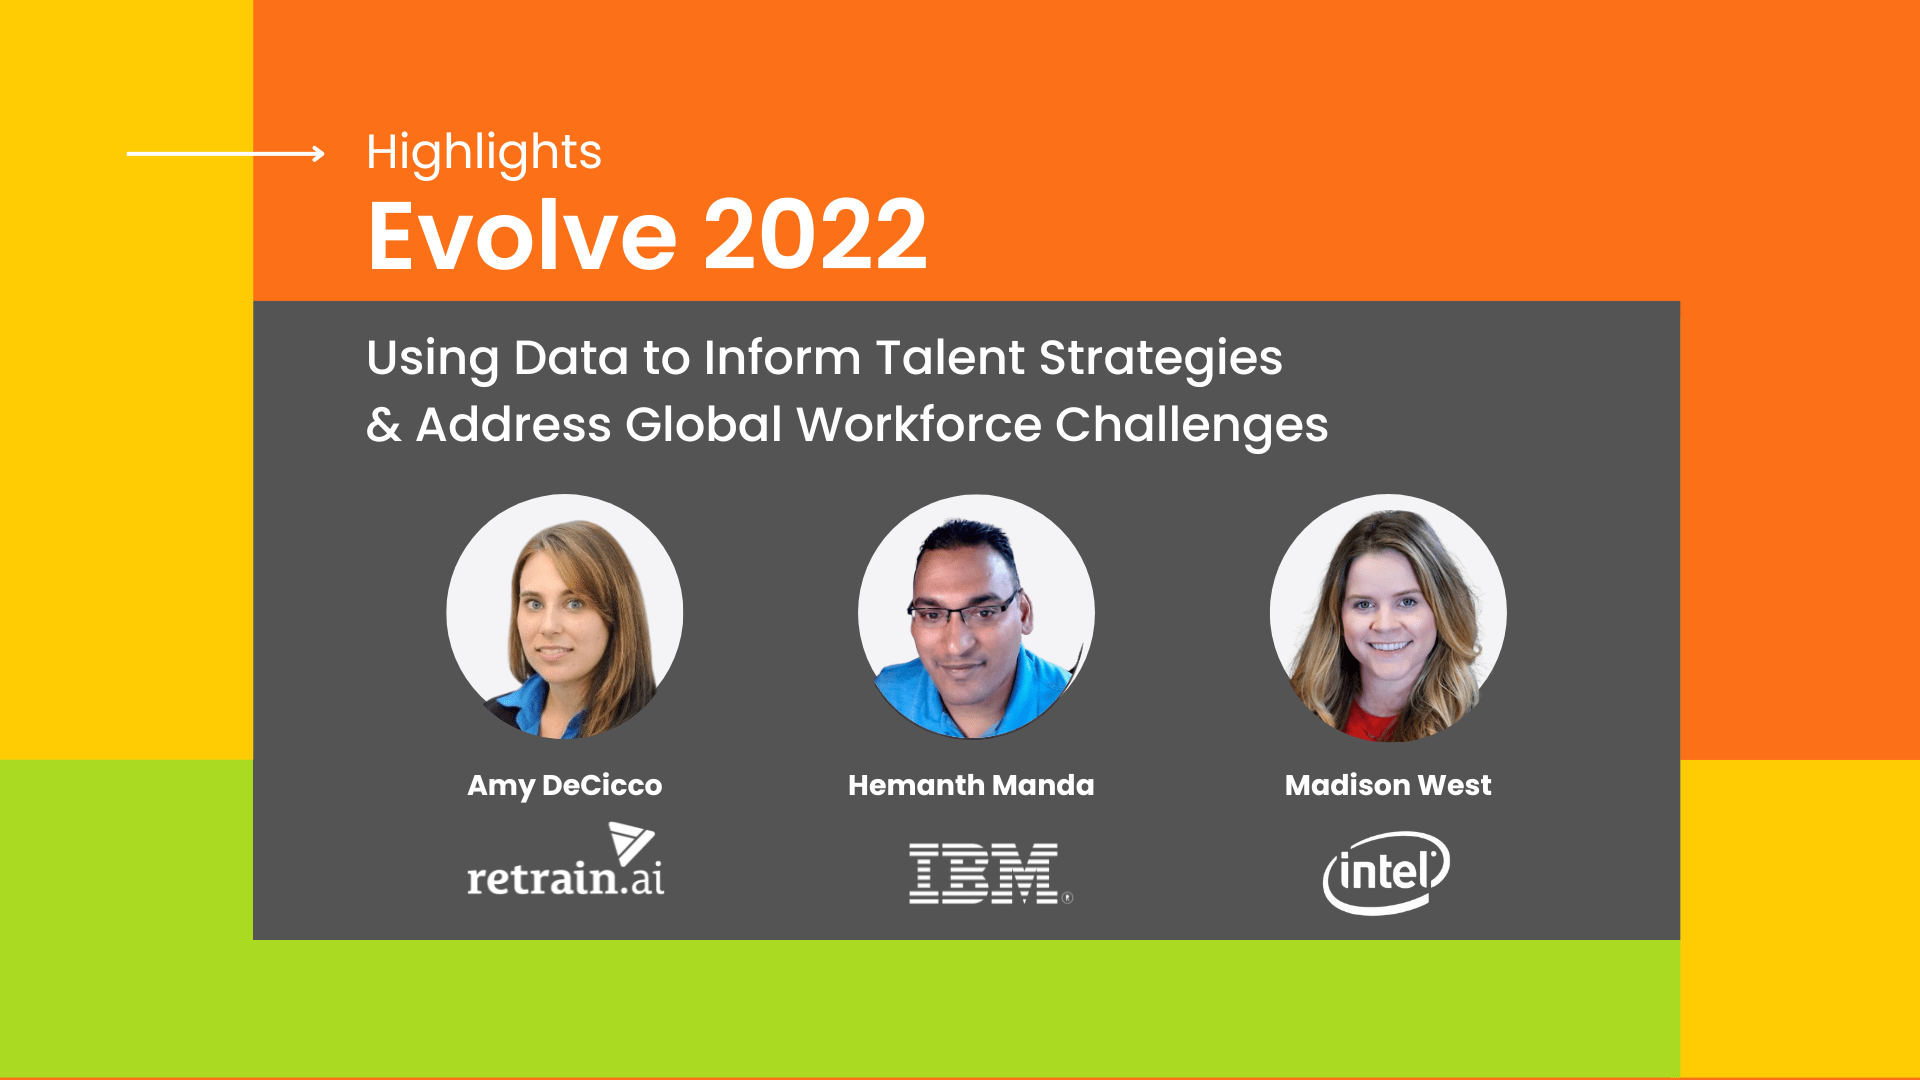 Using Data to Inform Talent Strategies and Address Global Workforce Challenges: IBM, Intel and retrain.ai Share Insights